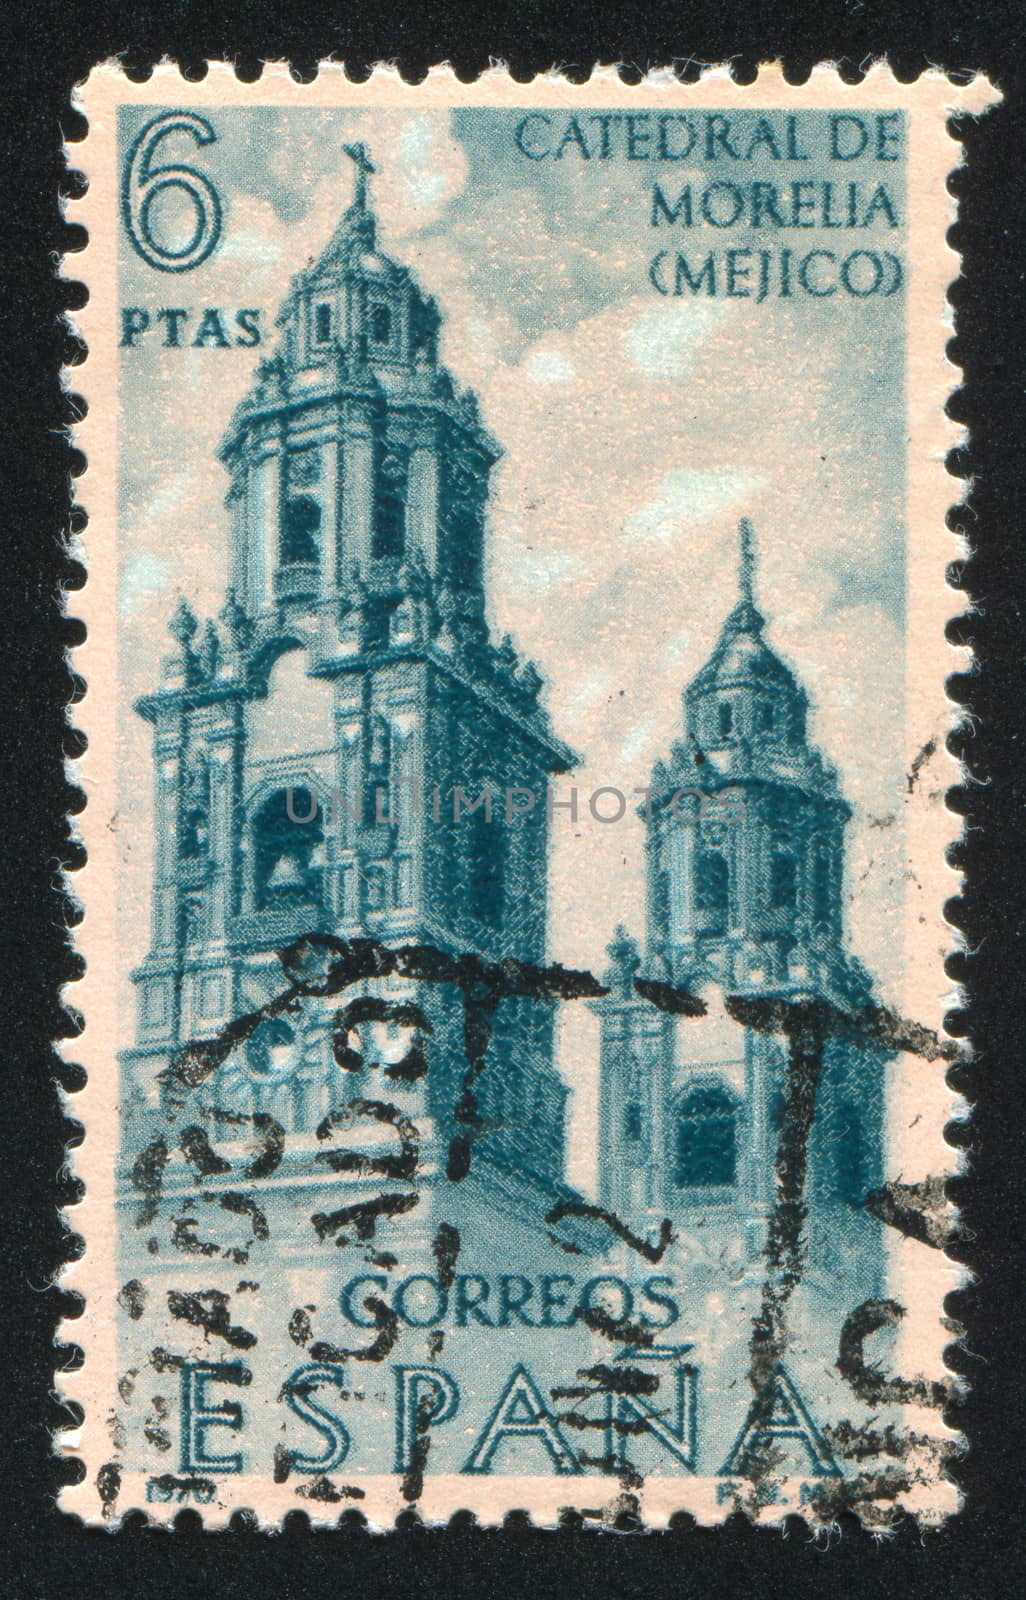 SPAIN - CIRCA 1970: stamp printed by Spain, shows Cathedral Towers, Morelia, Mexico, circa 1970